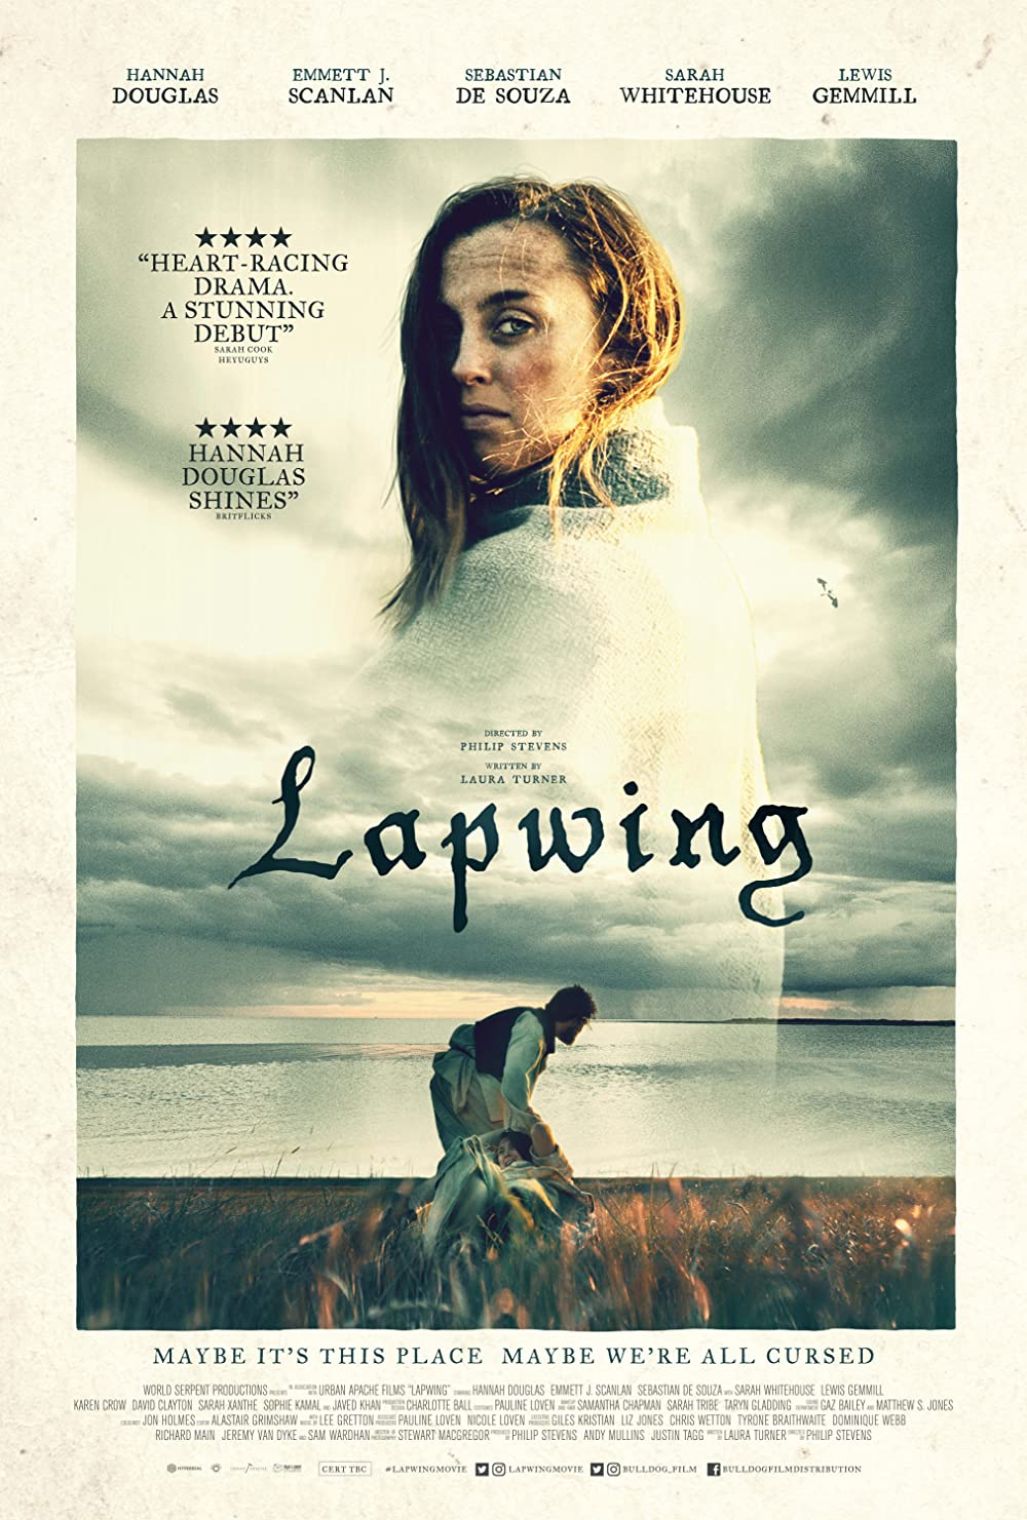 Emmett J. Scanlan stars in atmospheric period drama Lapwing, released in cinemas & on demand from Friday